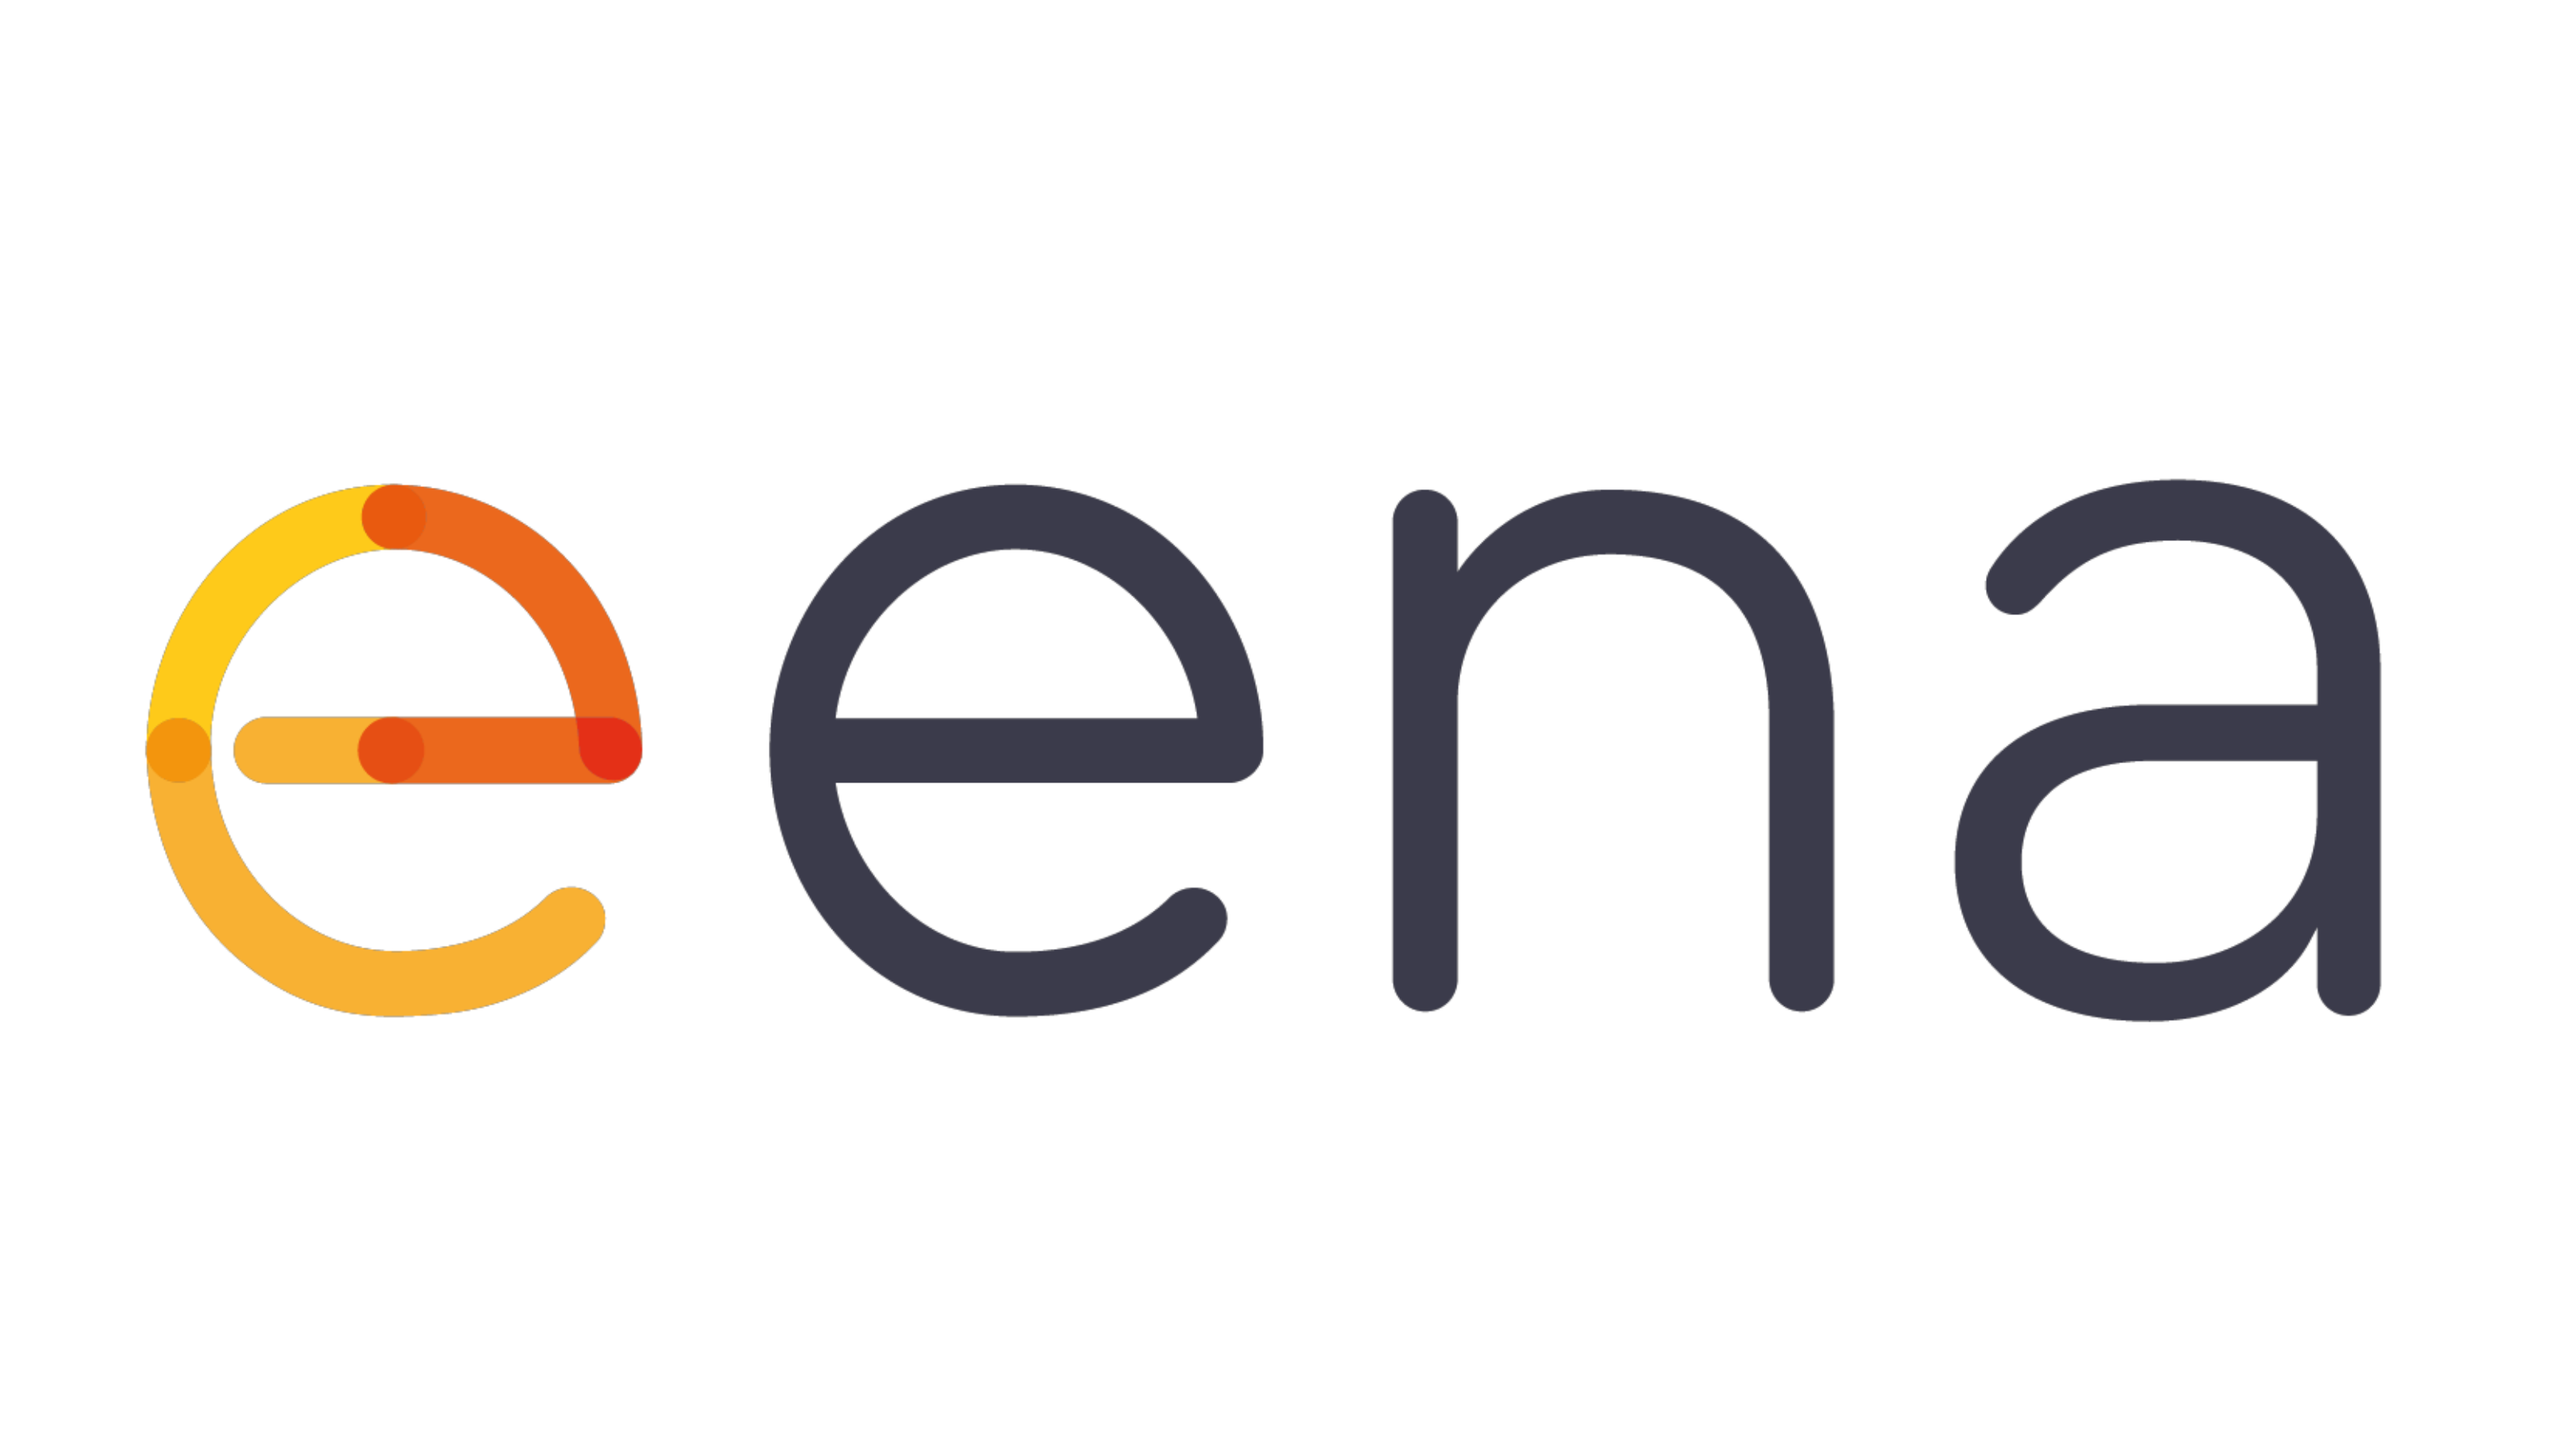 The image shows the EENA logo